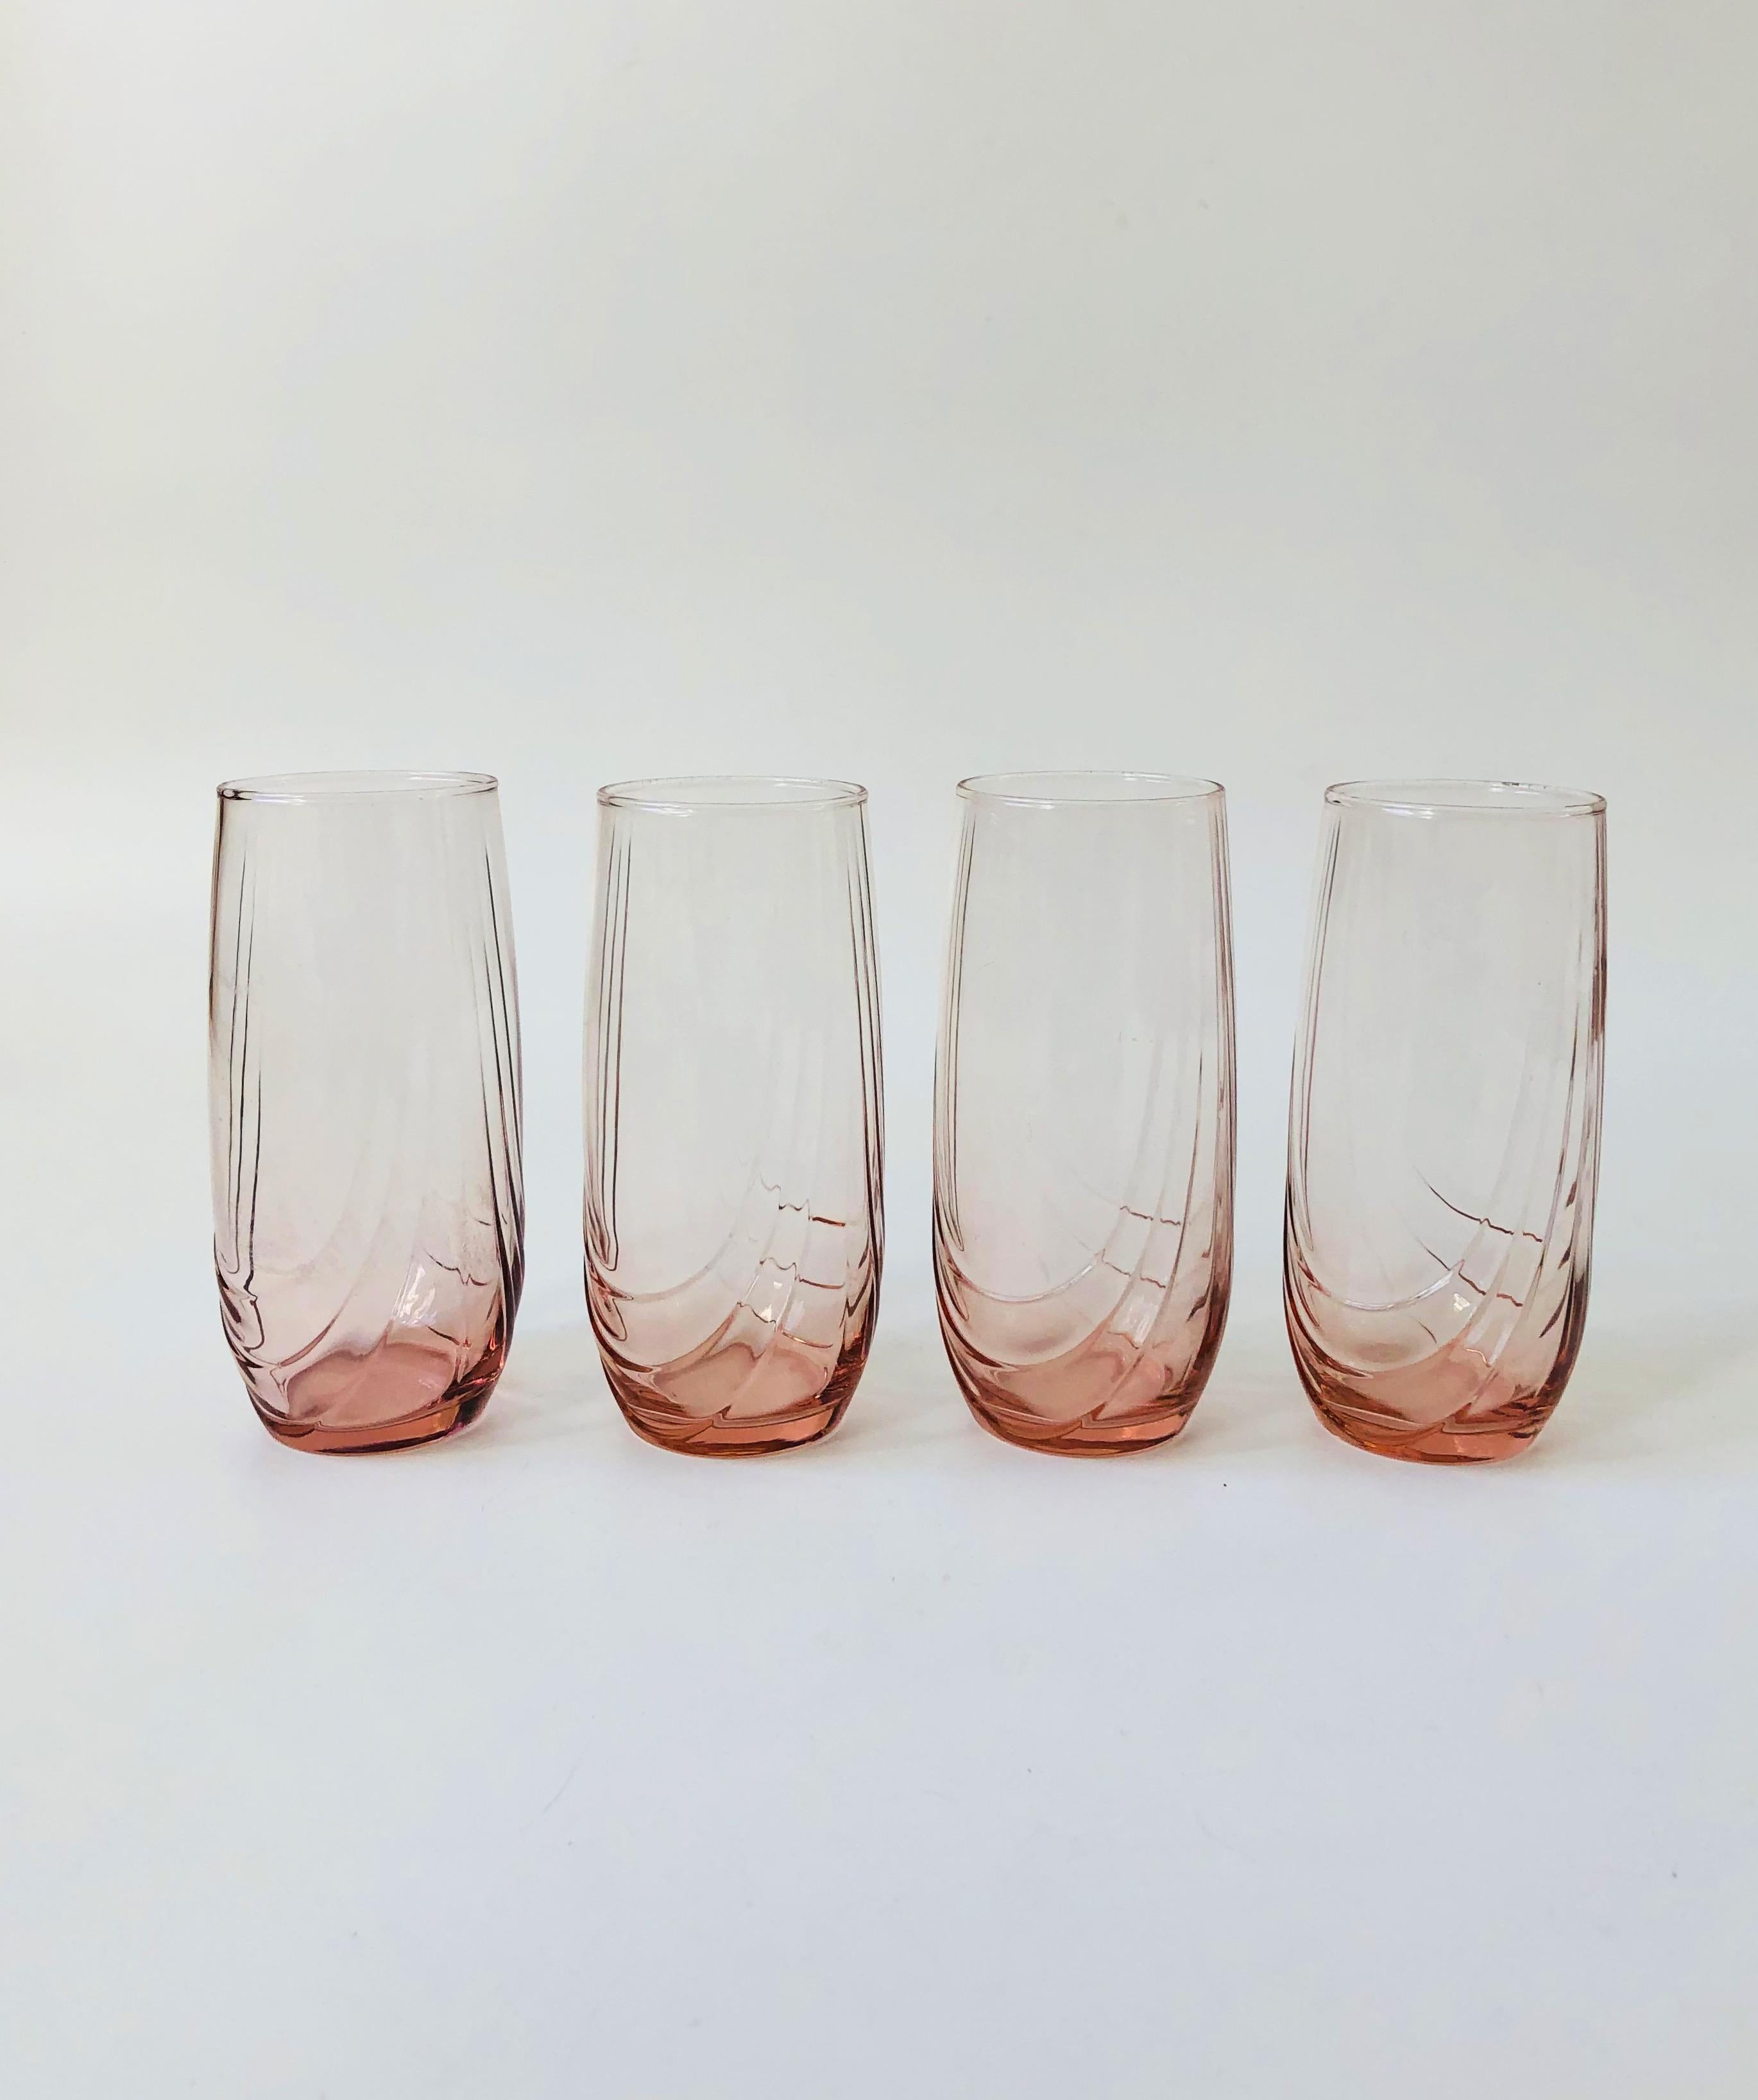 A set of 4 vintage 1980s highball tumblers. Beautiful pale pink color with a unique embossed detailing to the sides. Perfect for using for cocktails or everyday water glasses.
  